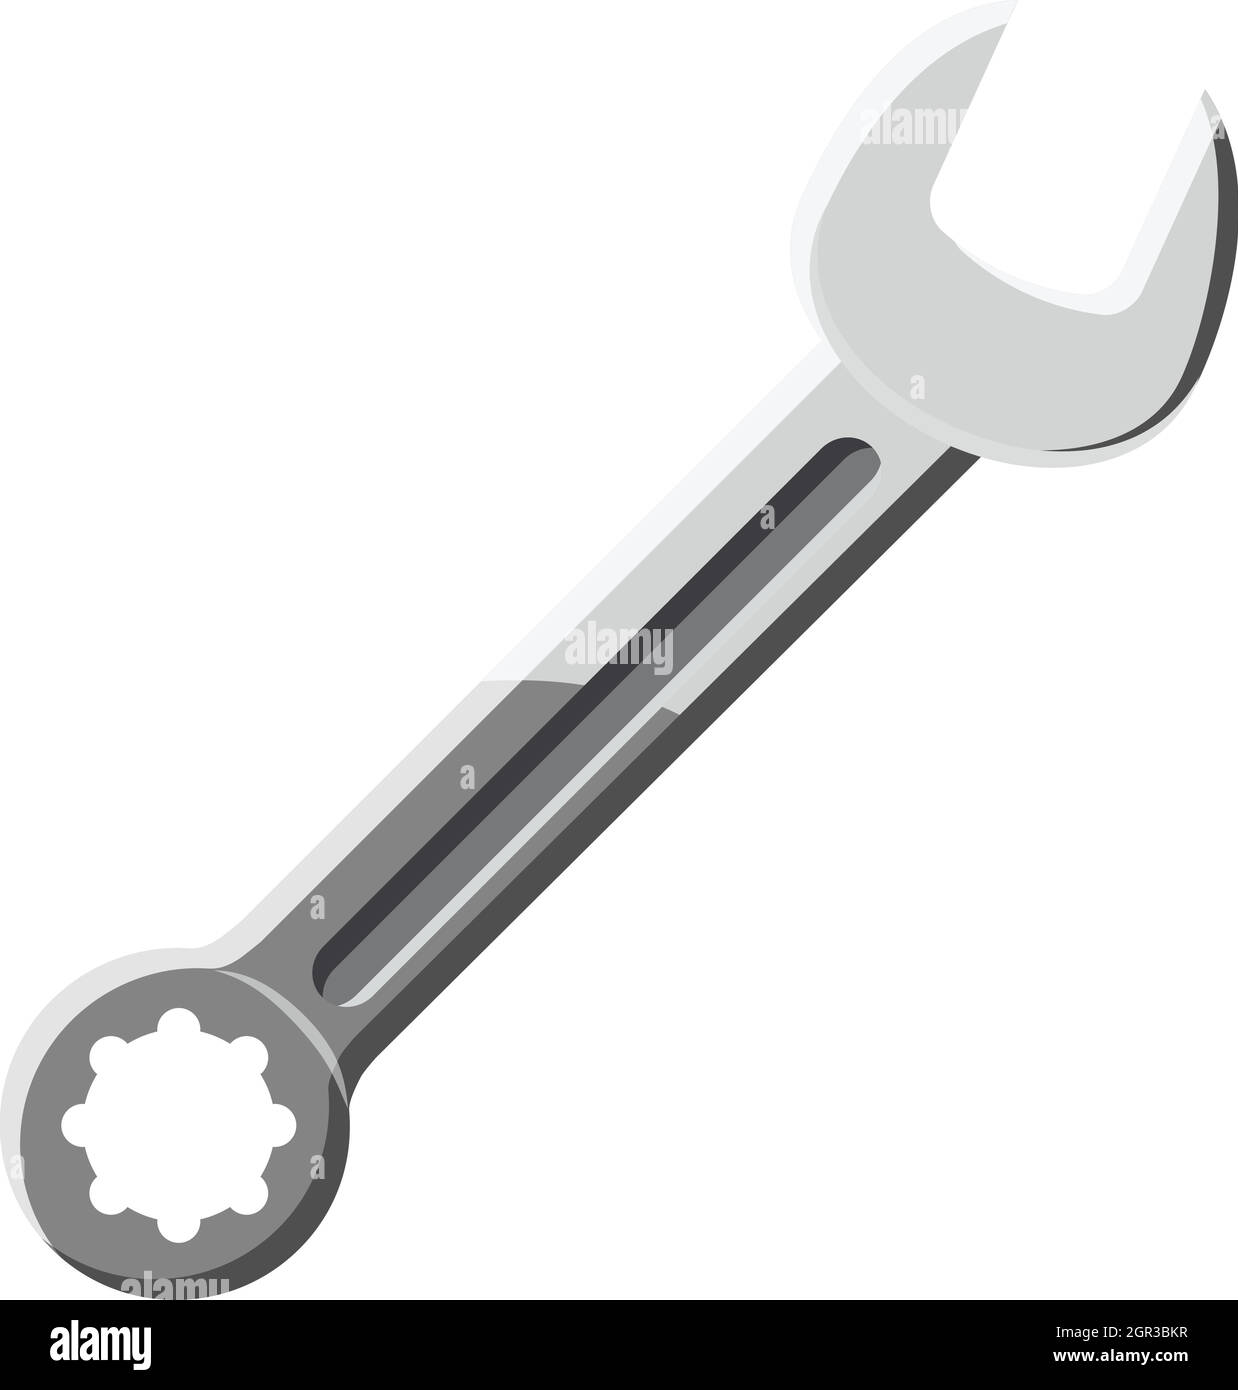 Spanner tool icon in cartoon style Stock Vector